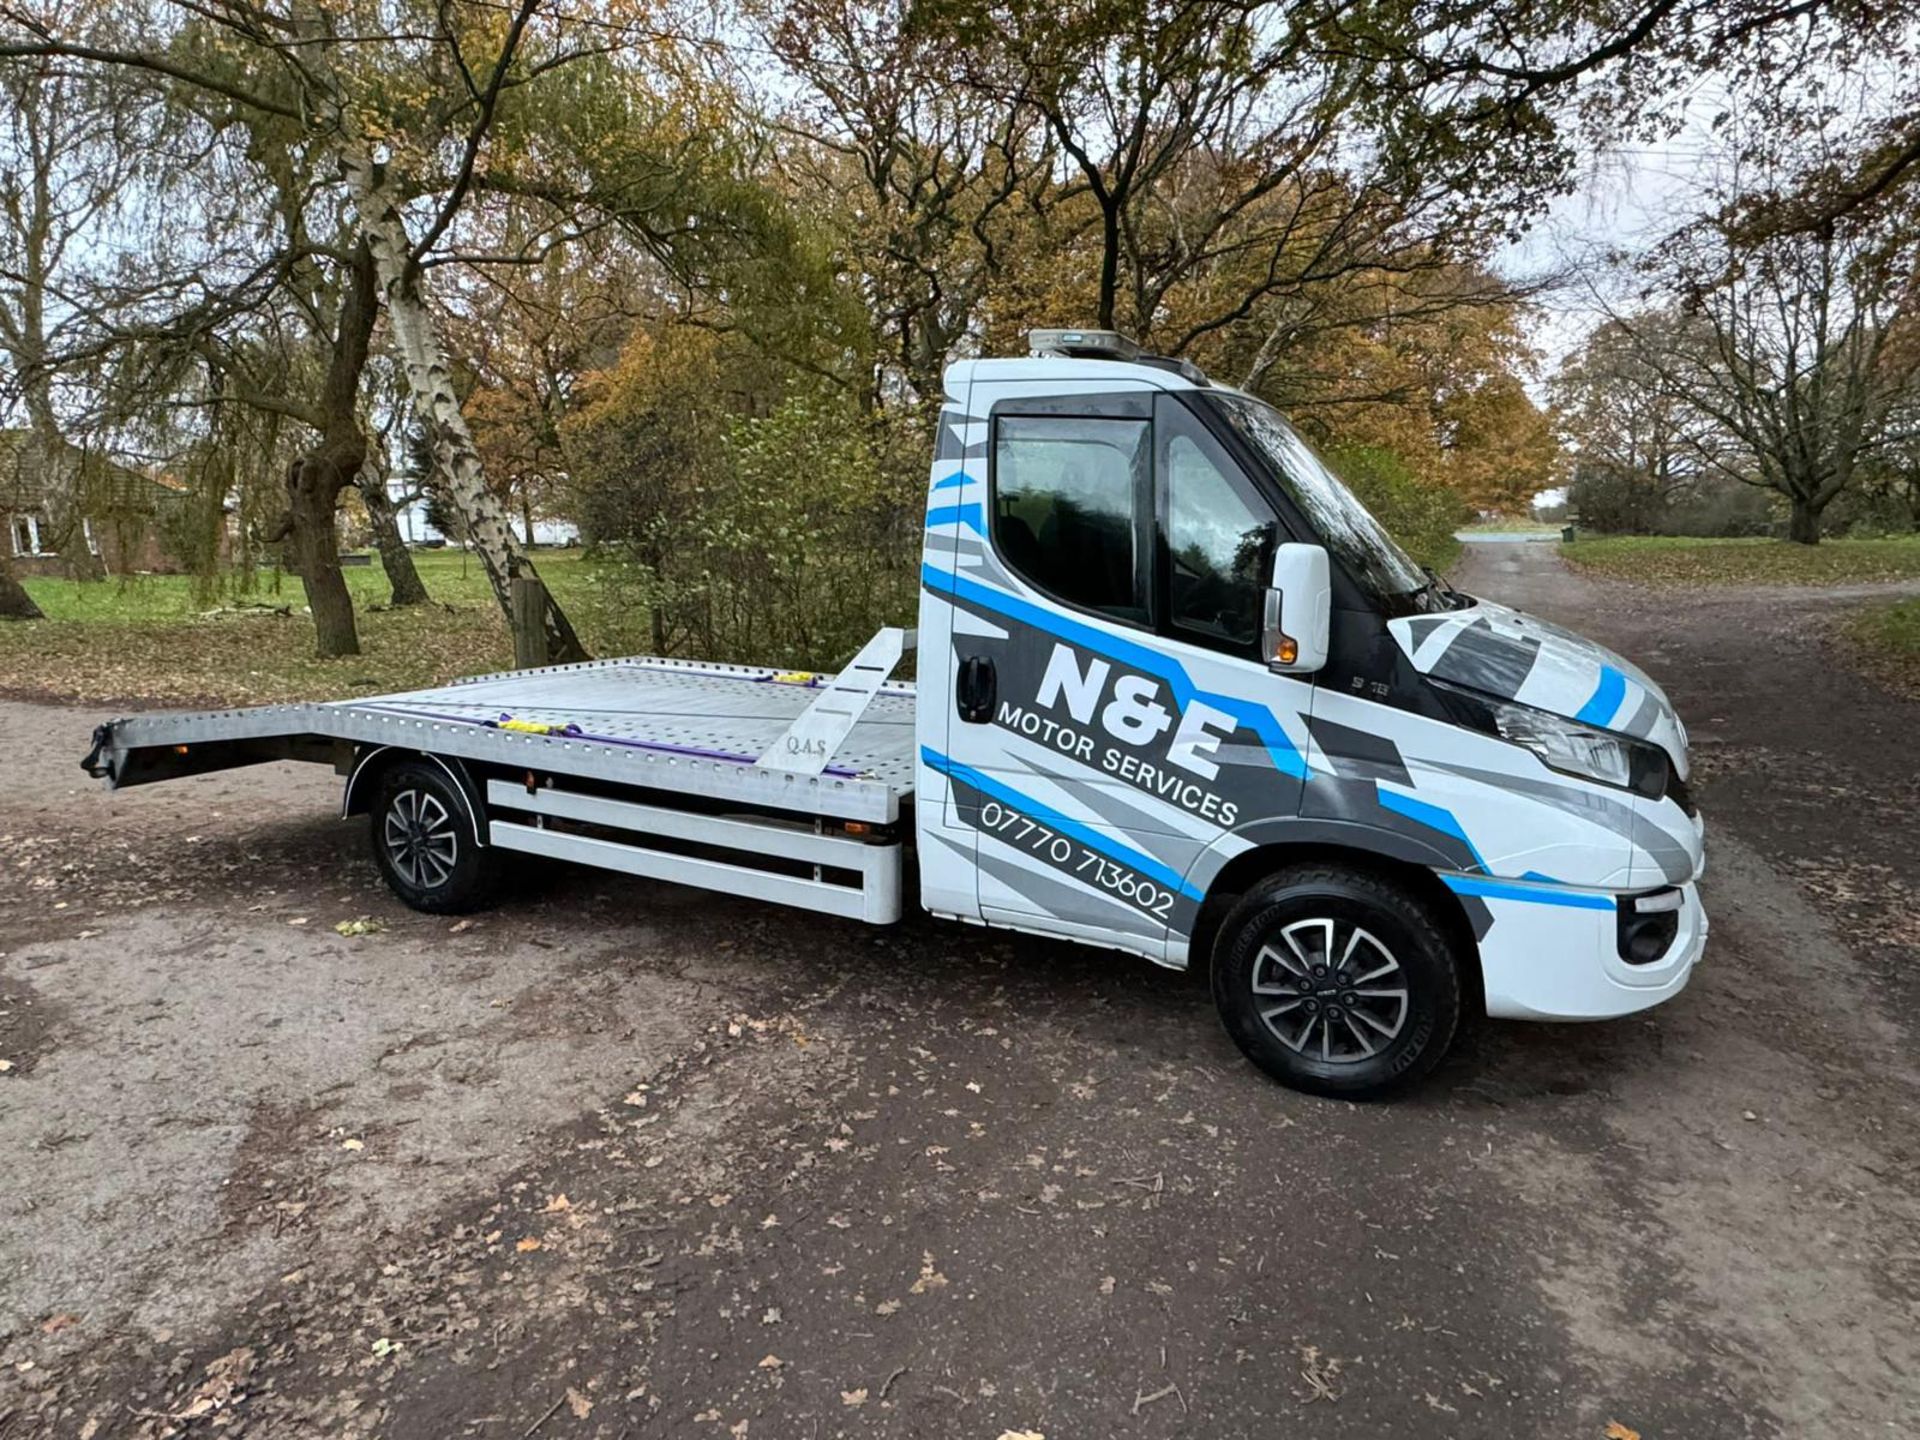 2018 18 IVECO DAILY RECOVERY TRUCK - 3.5 TON - LWB CHASSIS 3750 WHEE BASE - 127K MILES - Image 7 of 10